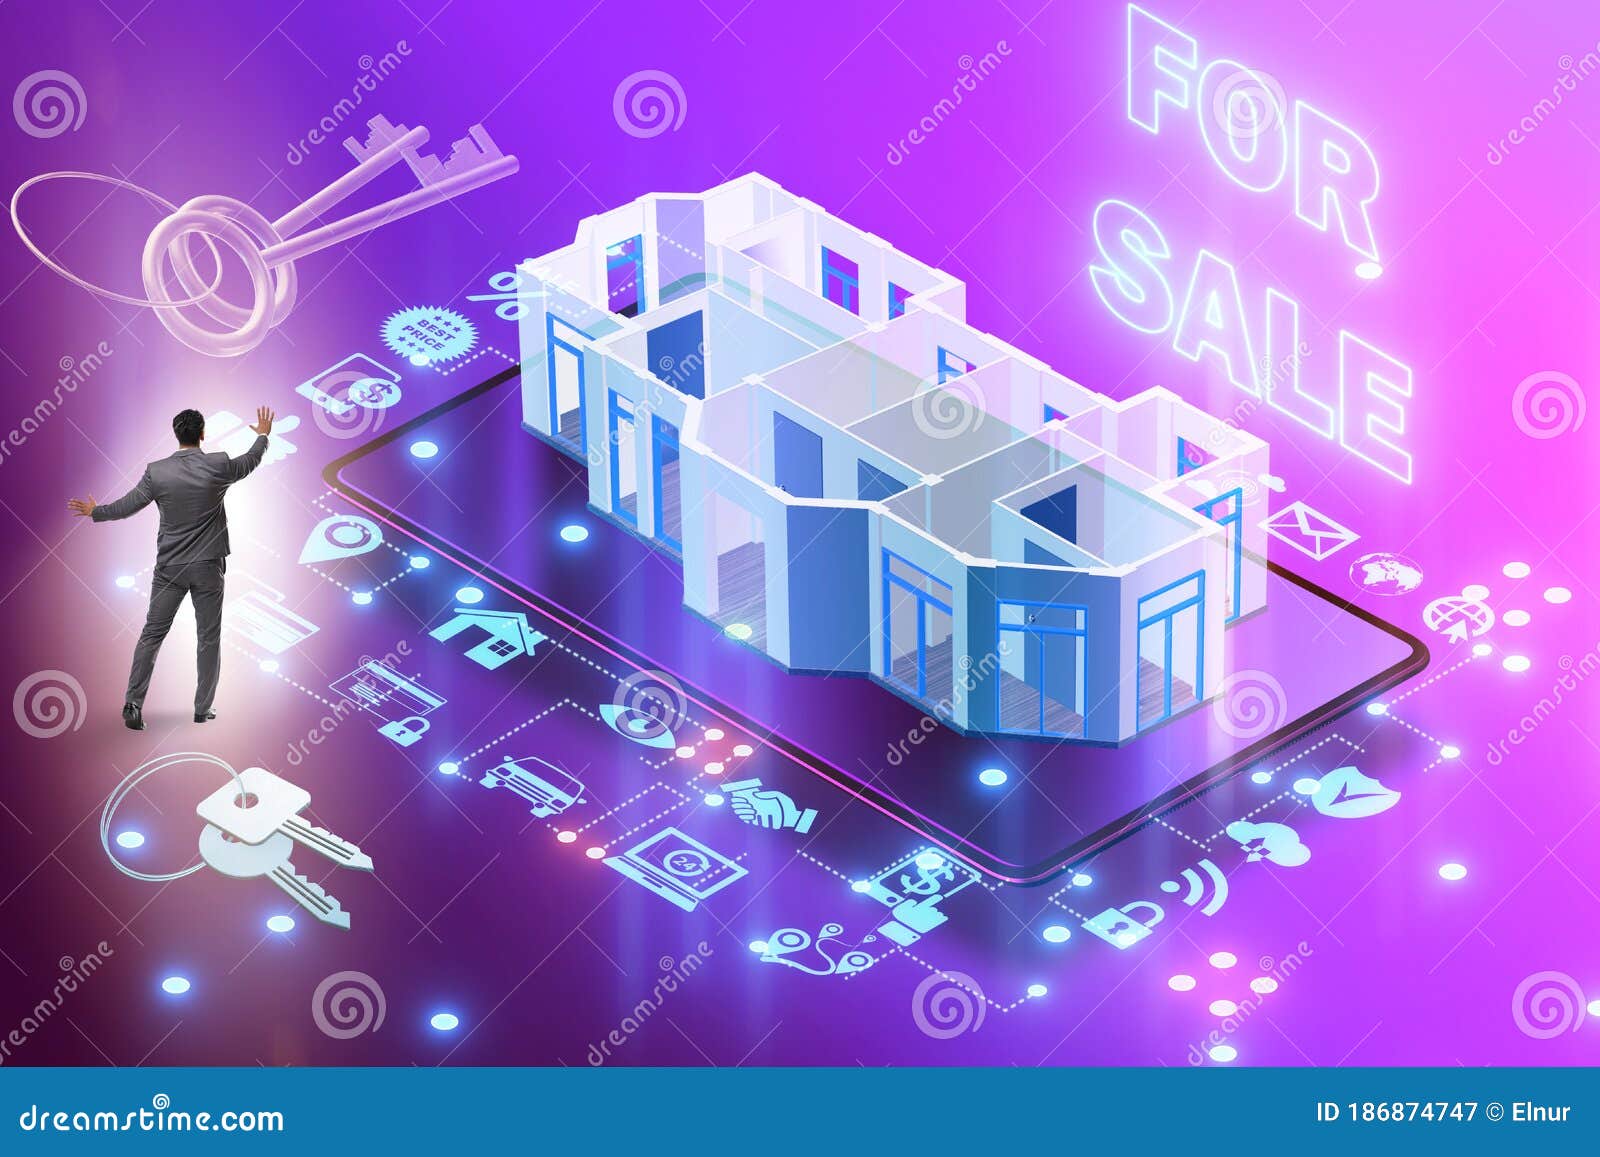 online real estate selling and buying concept